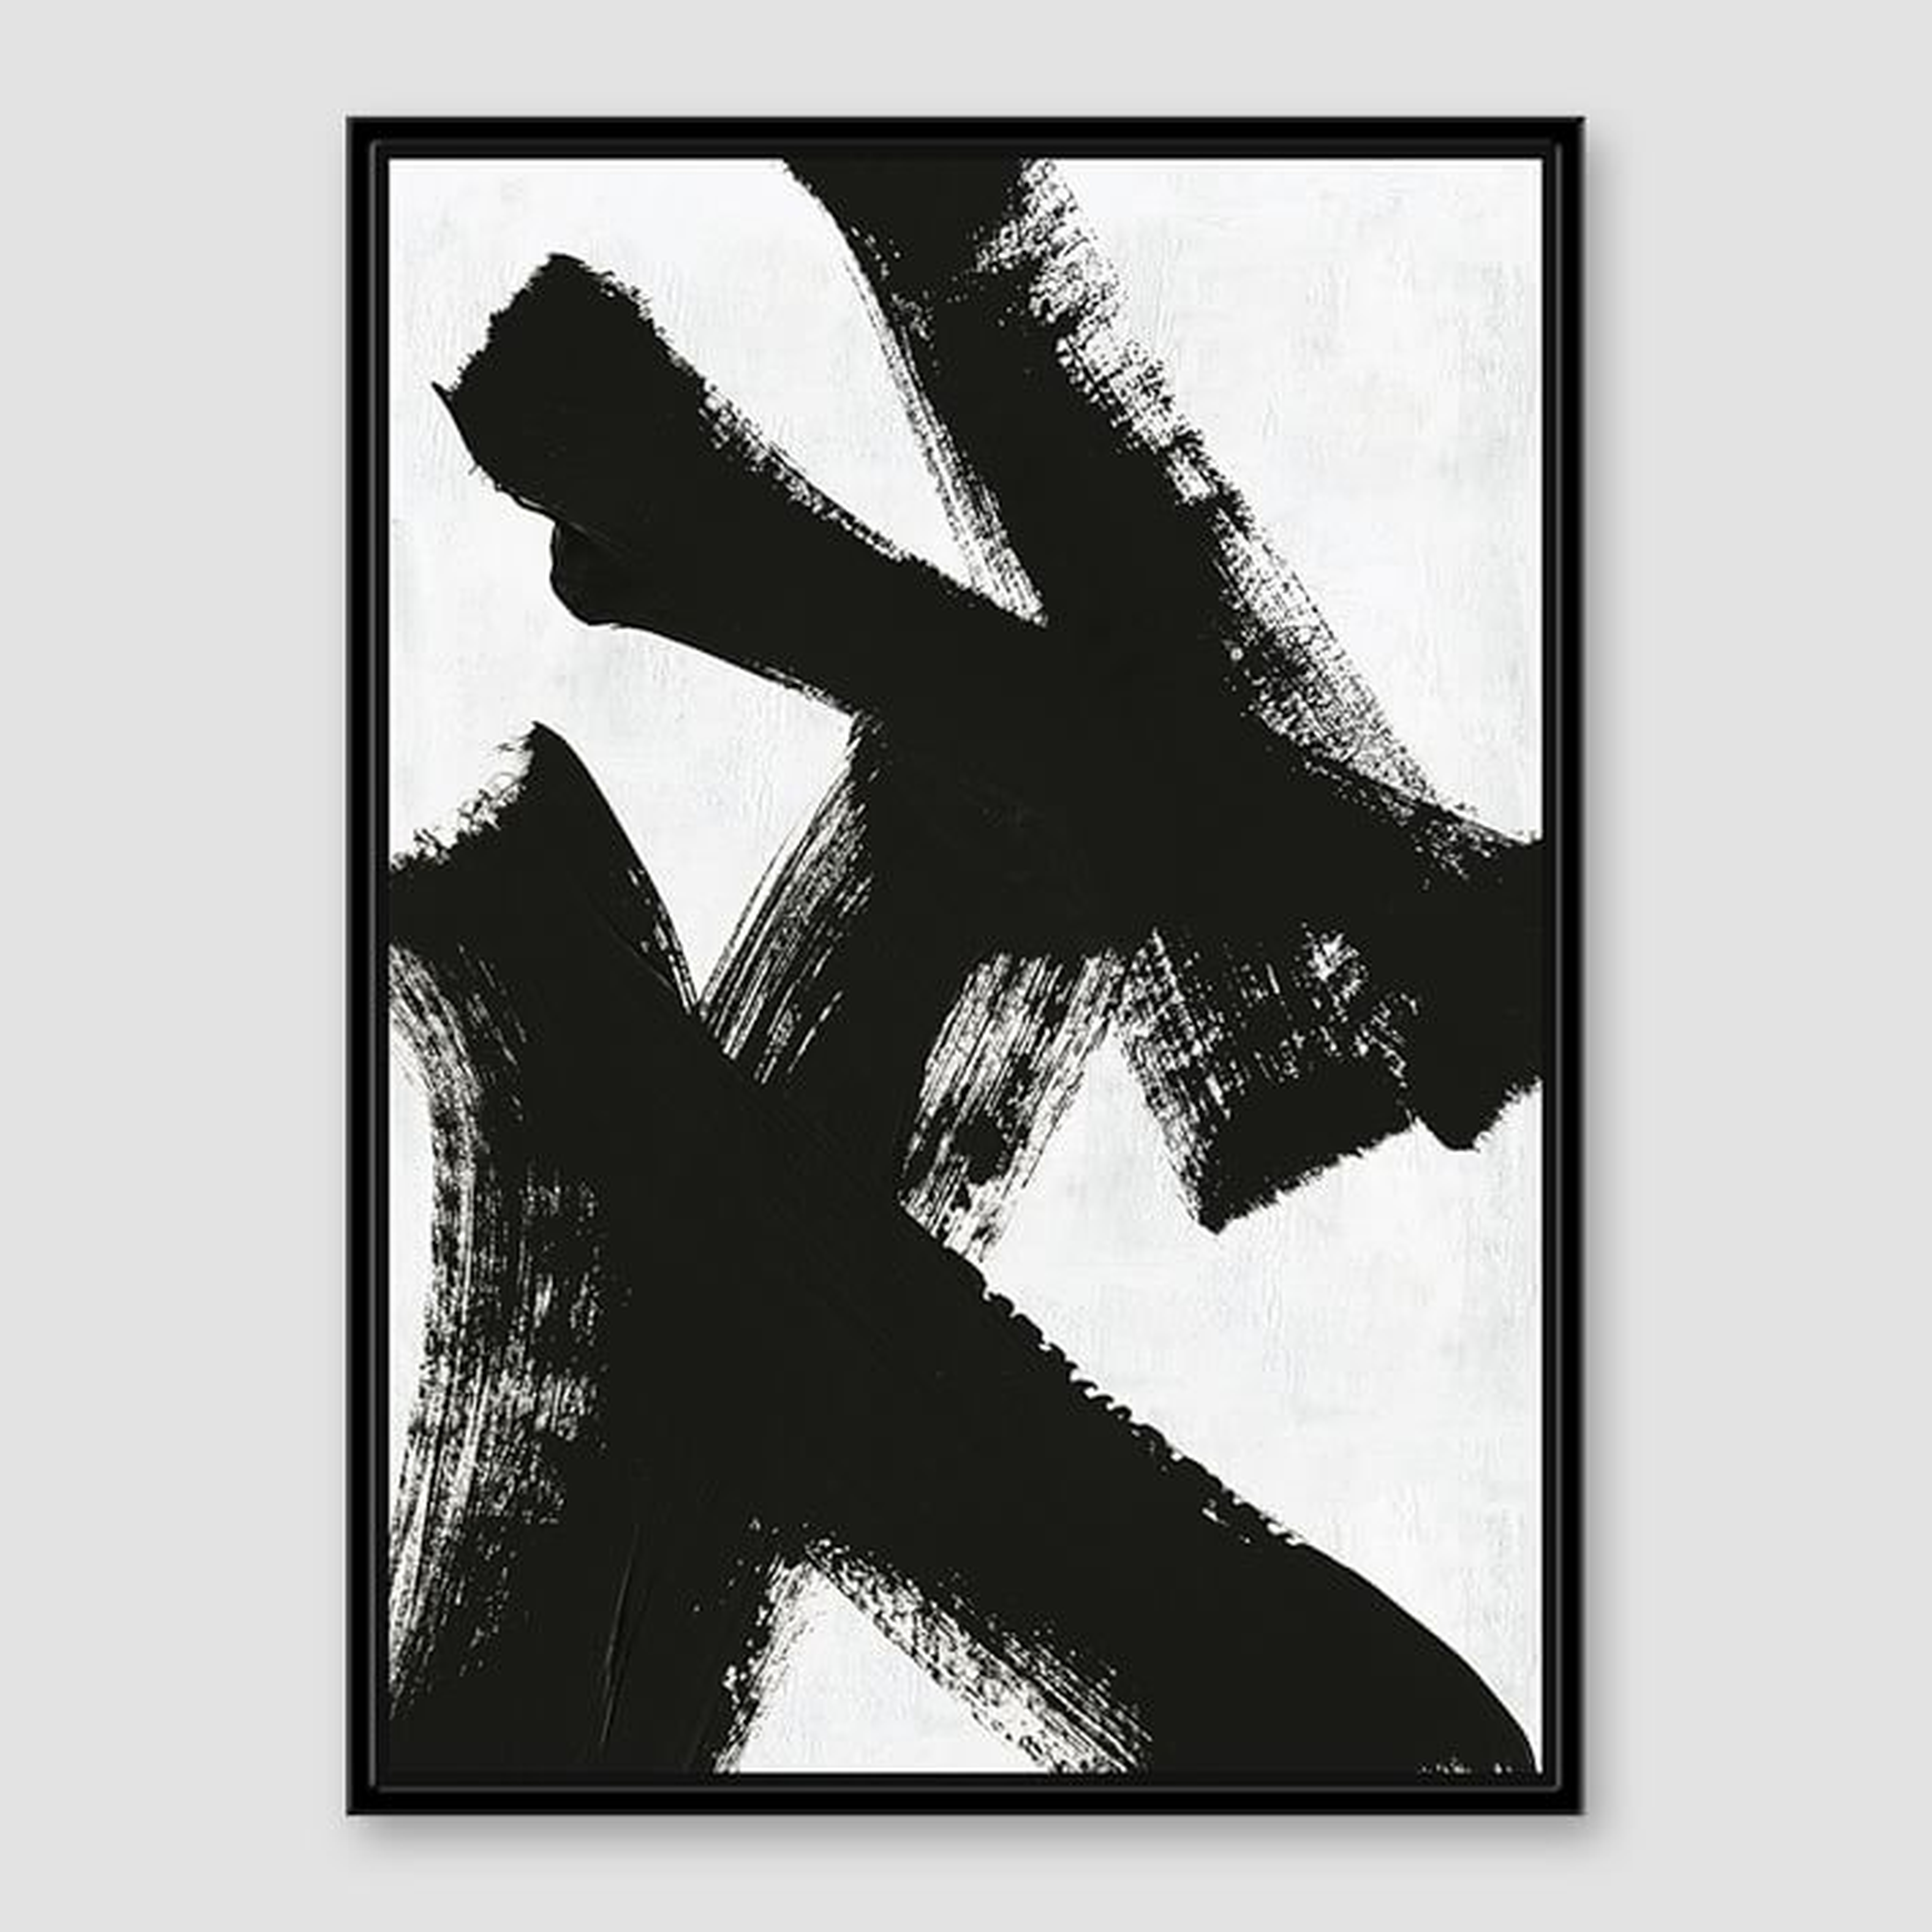 Framed Prints - Abstract Ink Brush - Double X - West Elm